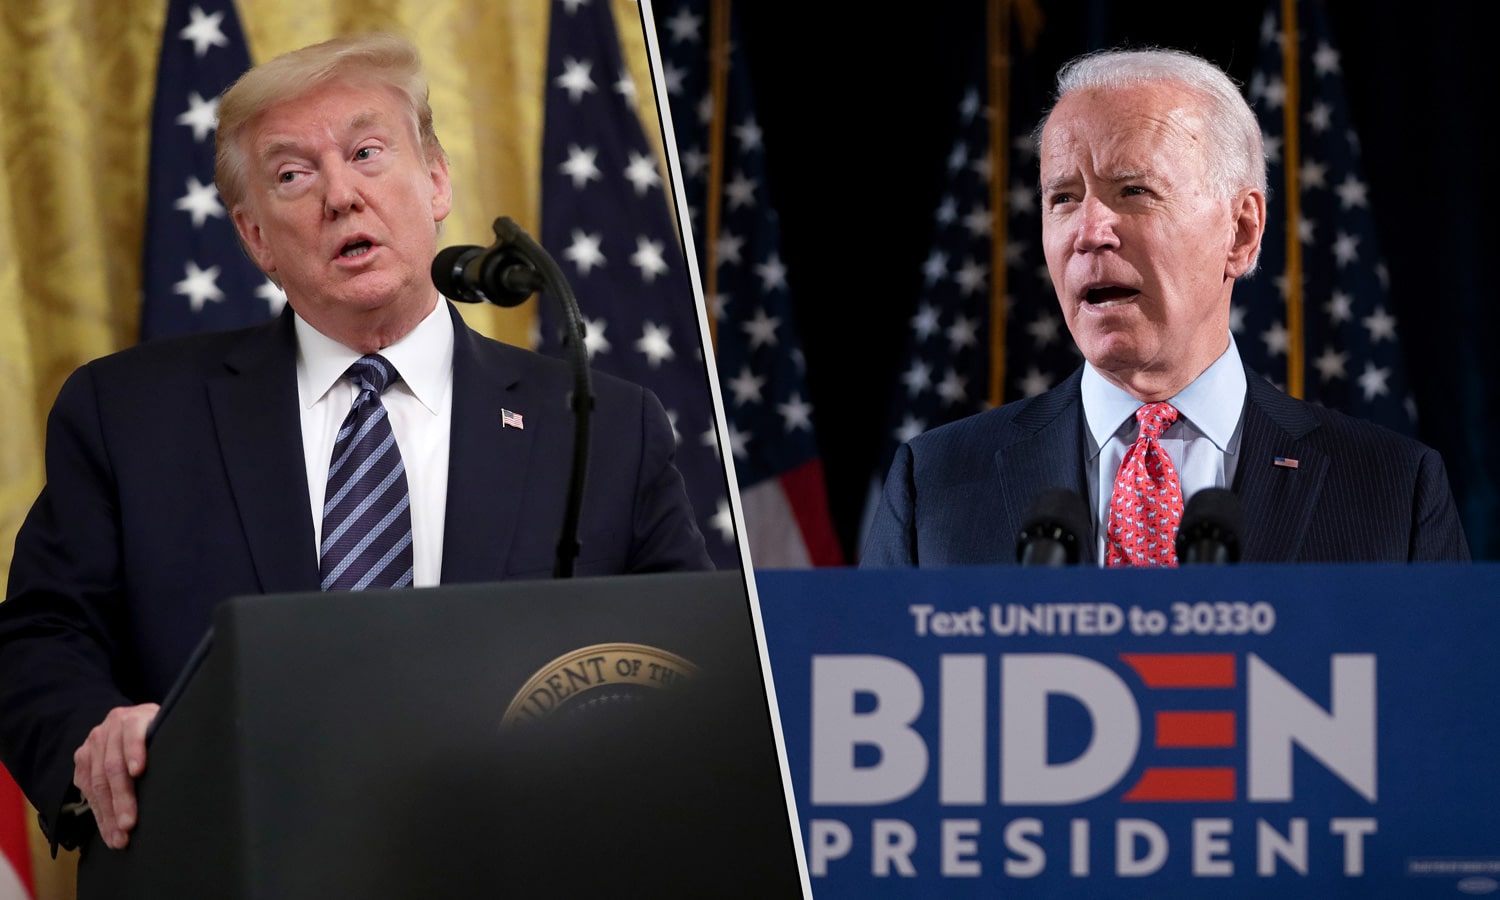 Poll: Readers believe Trump and Biden equally possible to legalize marijuana